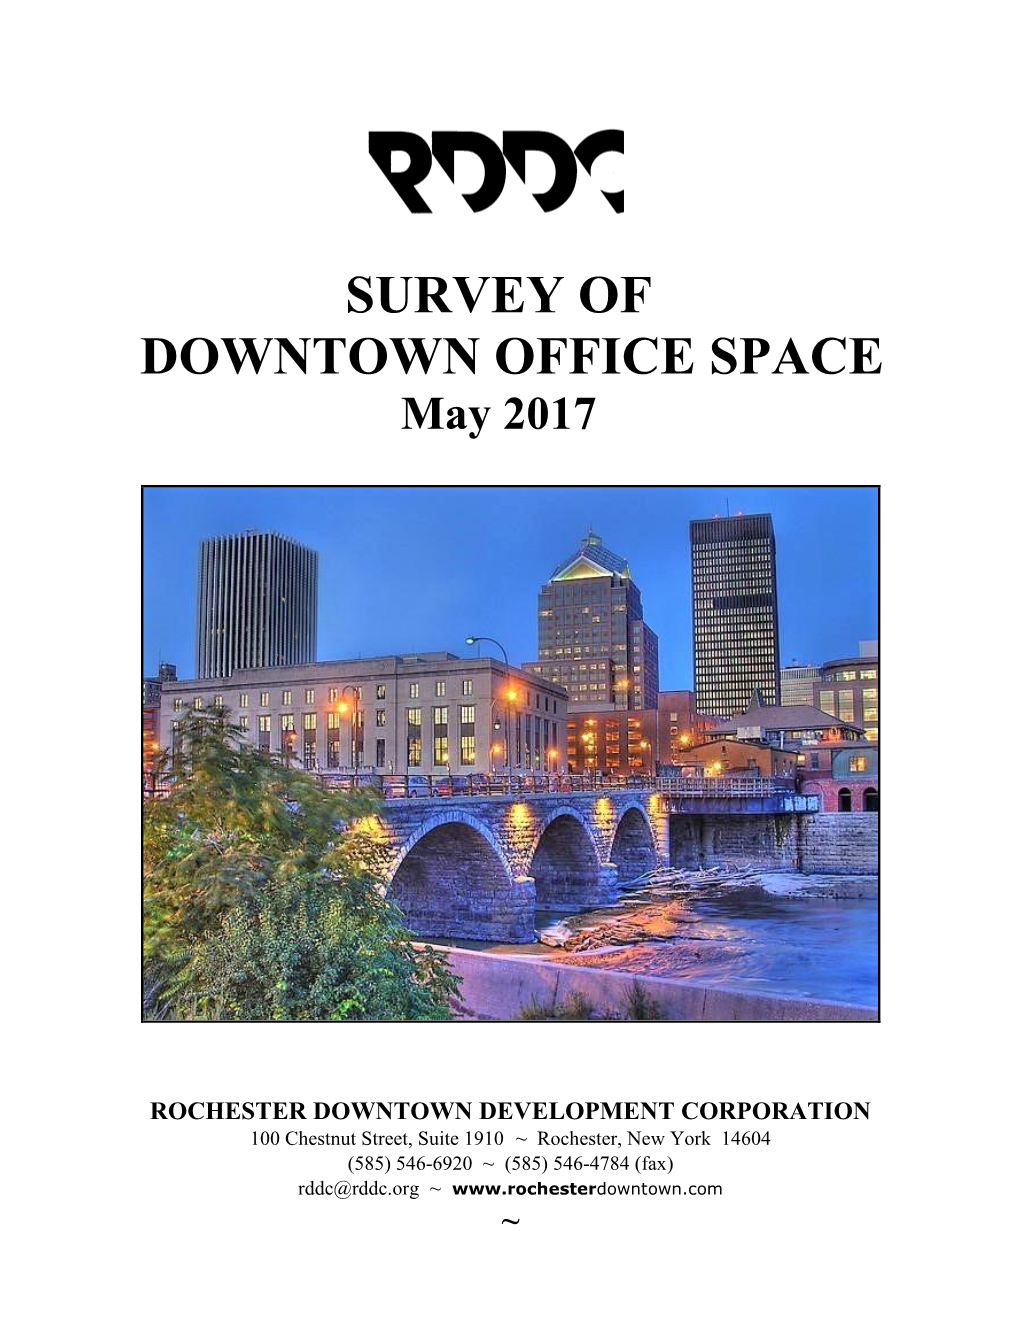 SURVEY of DOWNTOWN OFFICE SPACE May 2017